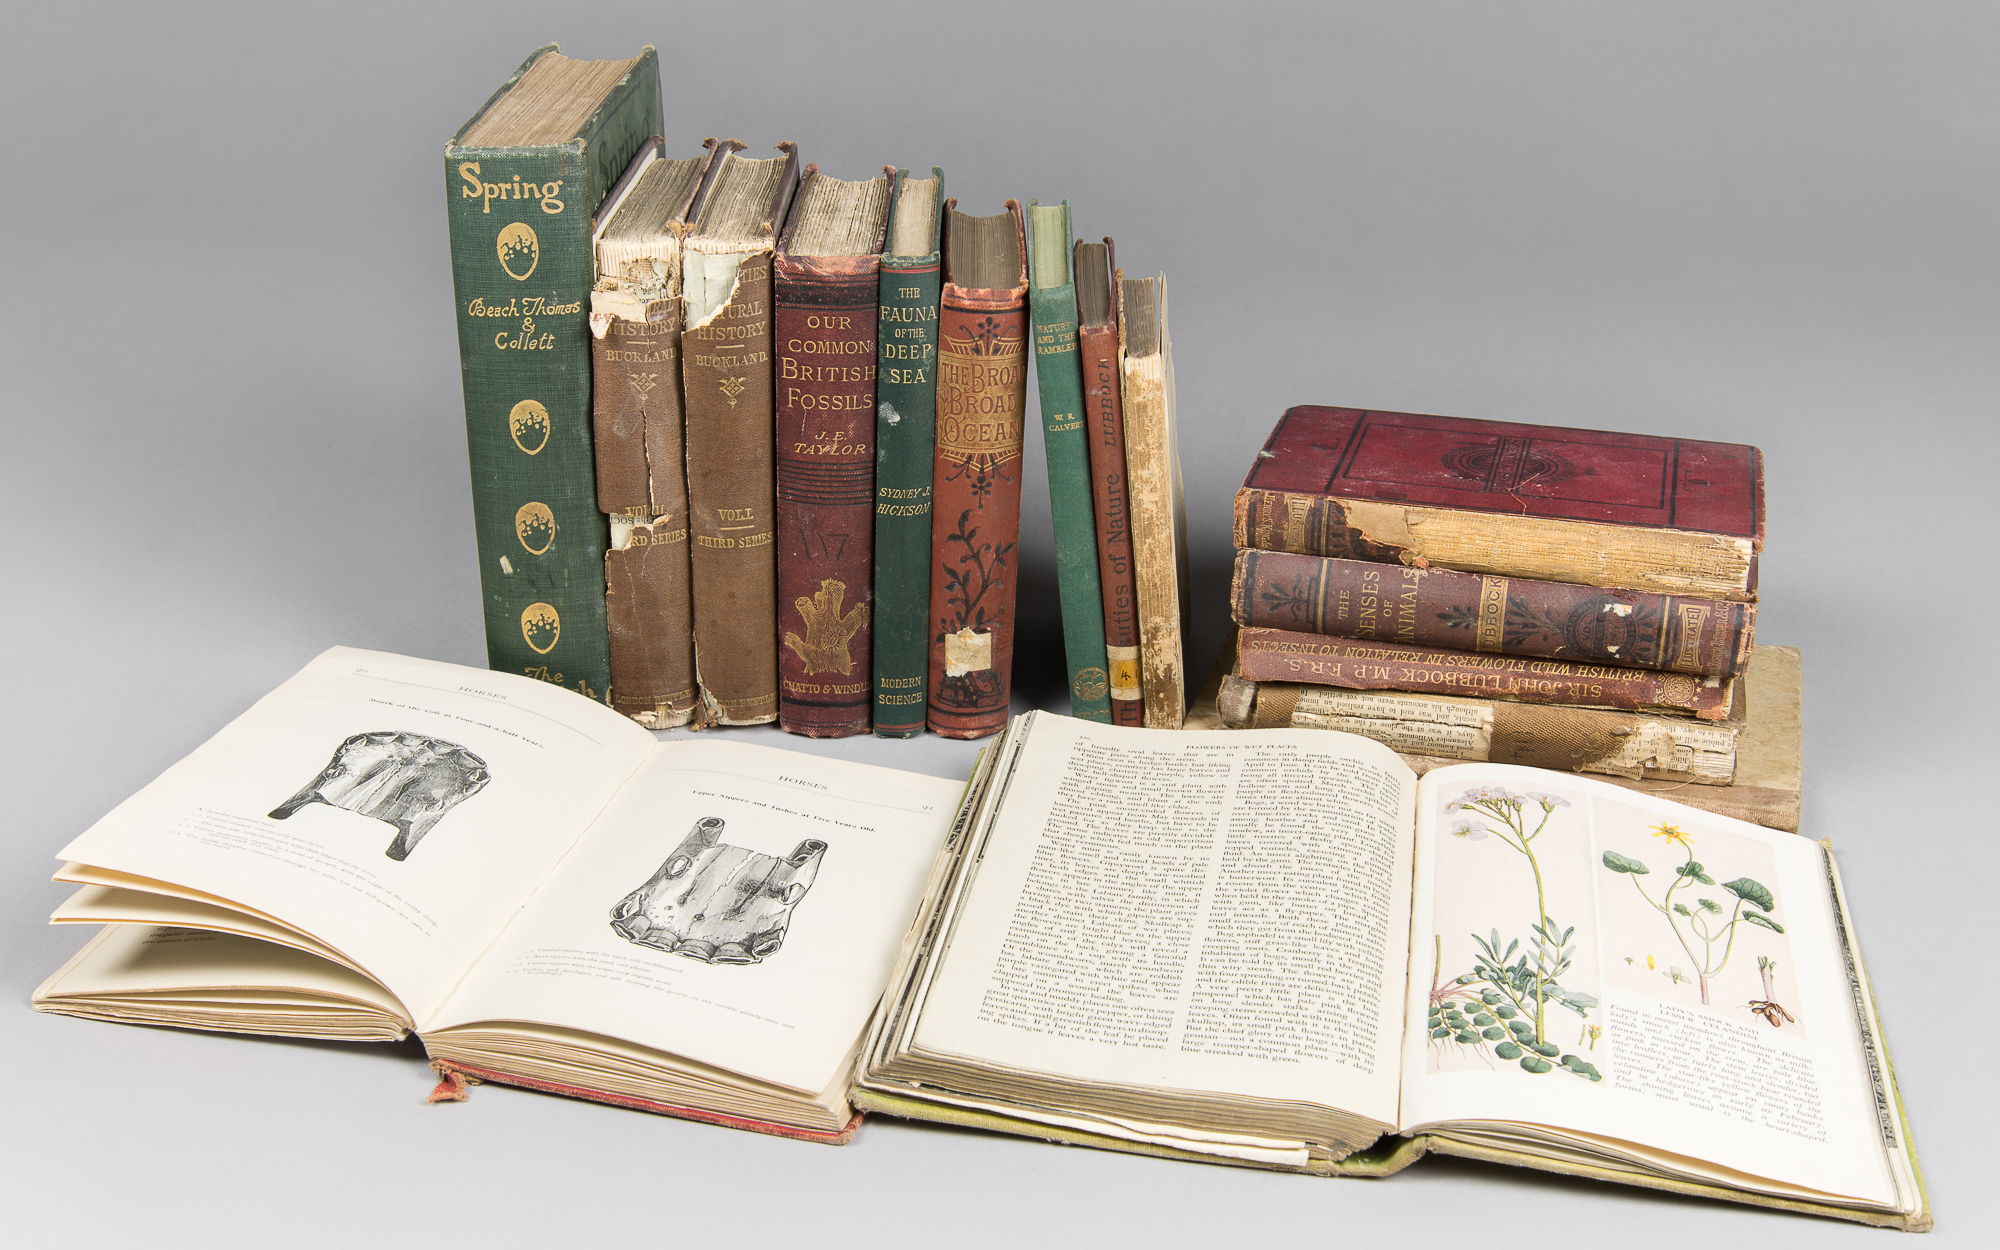 A COLLECTION OF NATURAL HISTORY BOOKS. Late 19th/early 20th century. Subjects include botany,